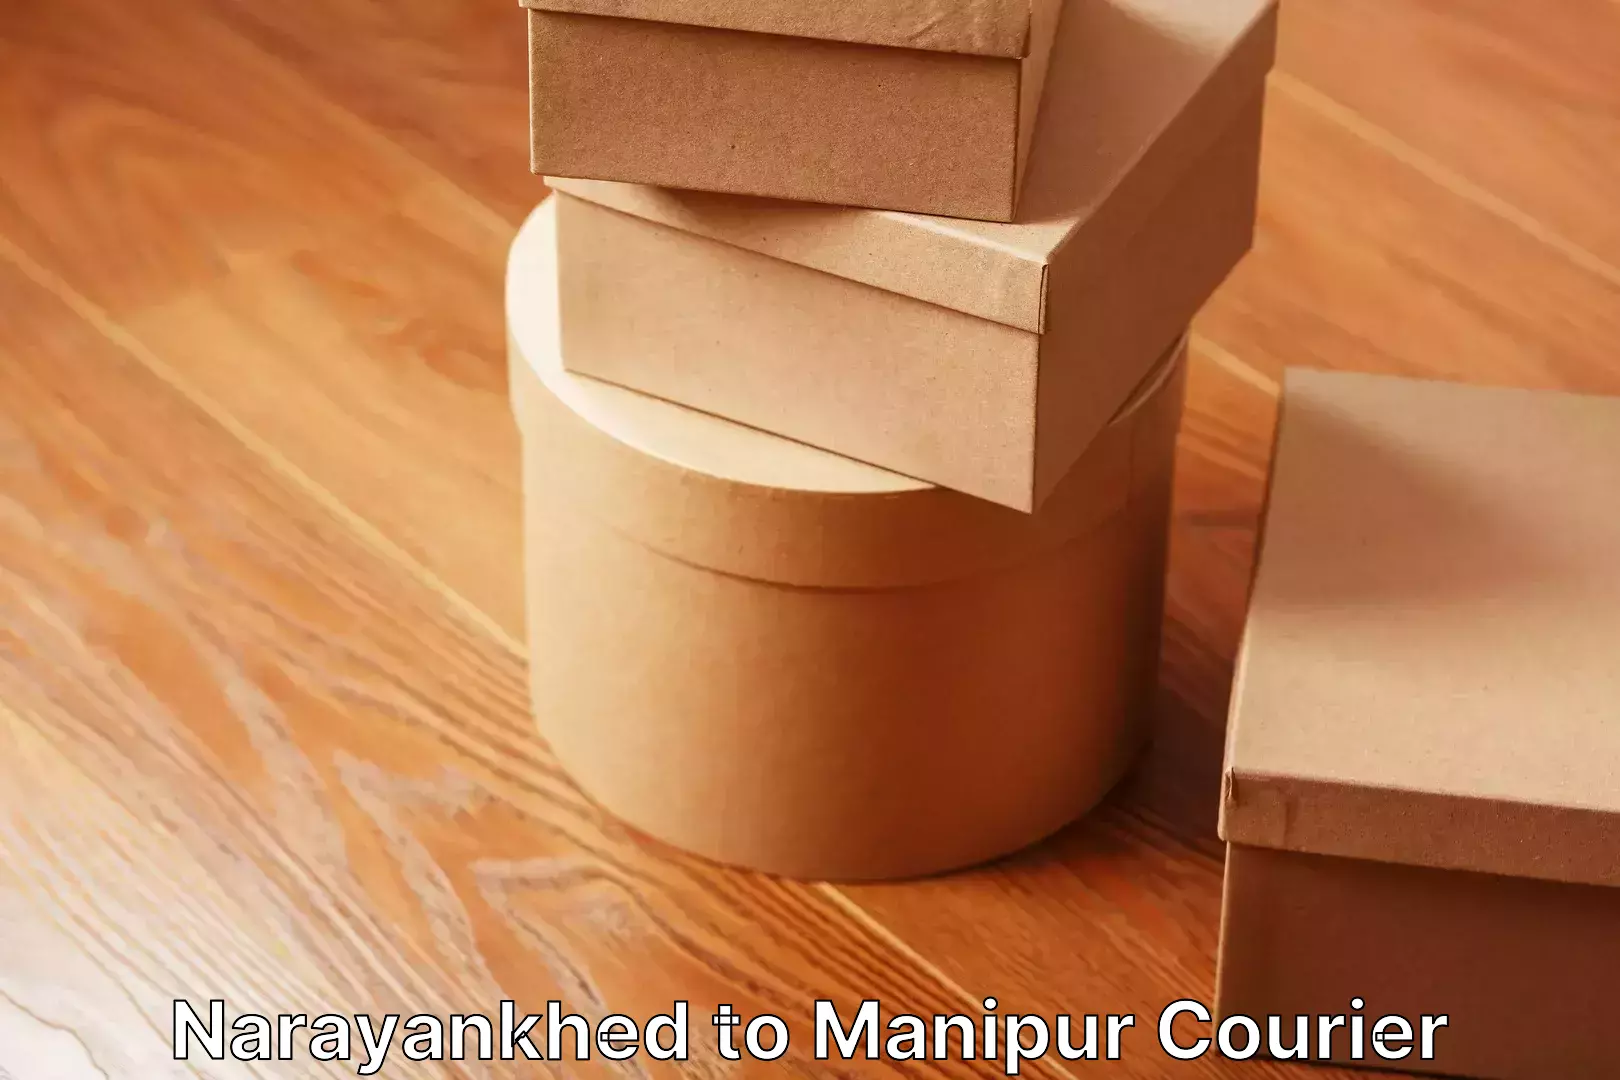 Residential moving experts Narayankhed to Manipur